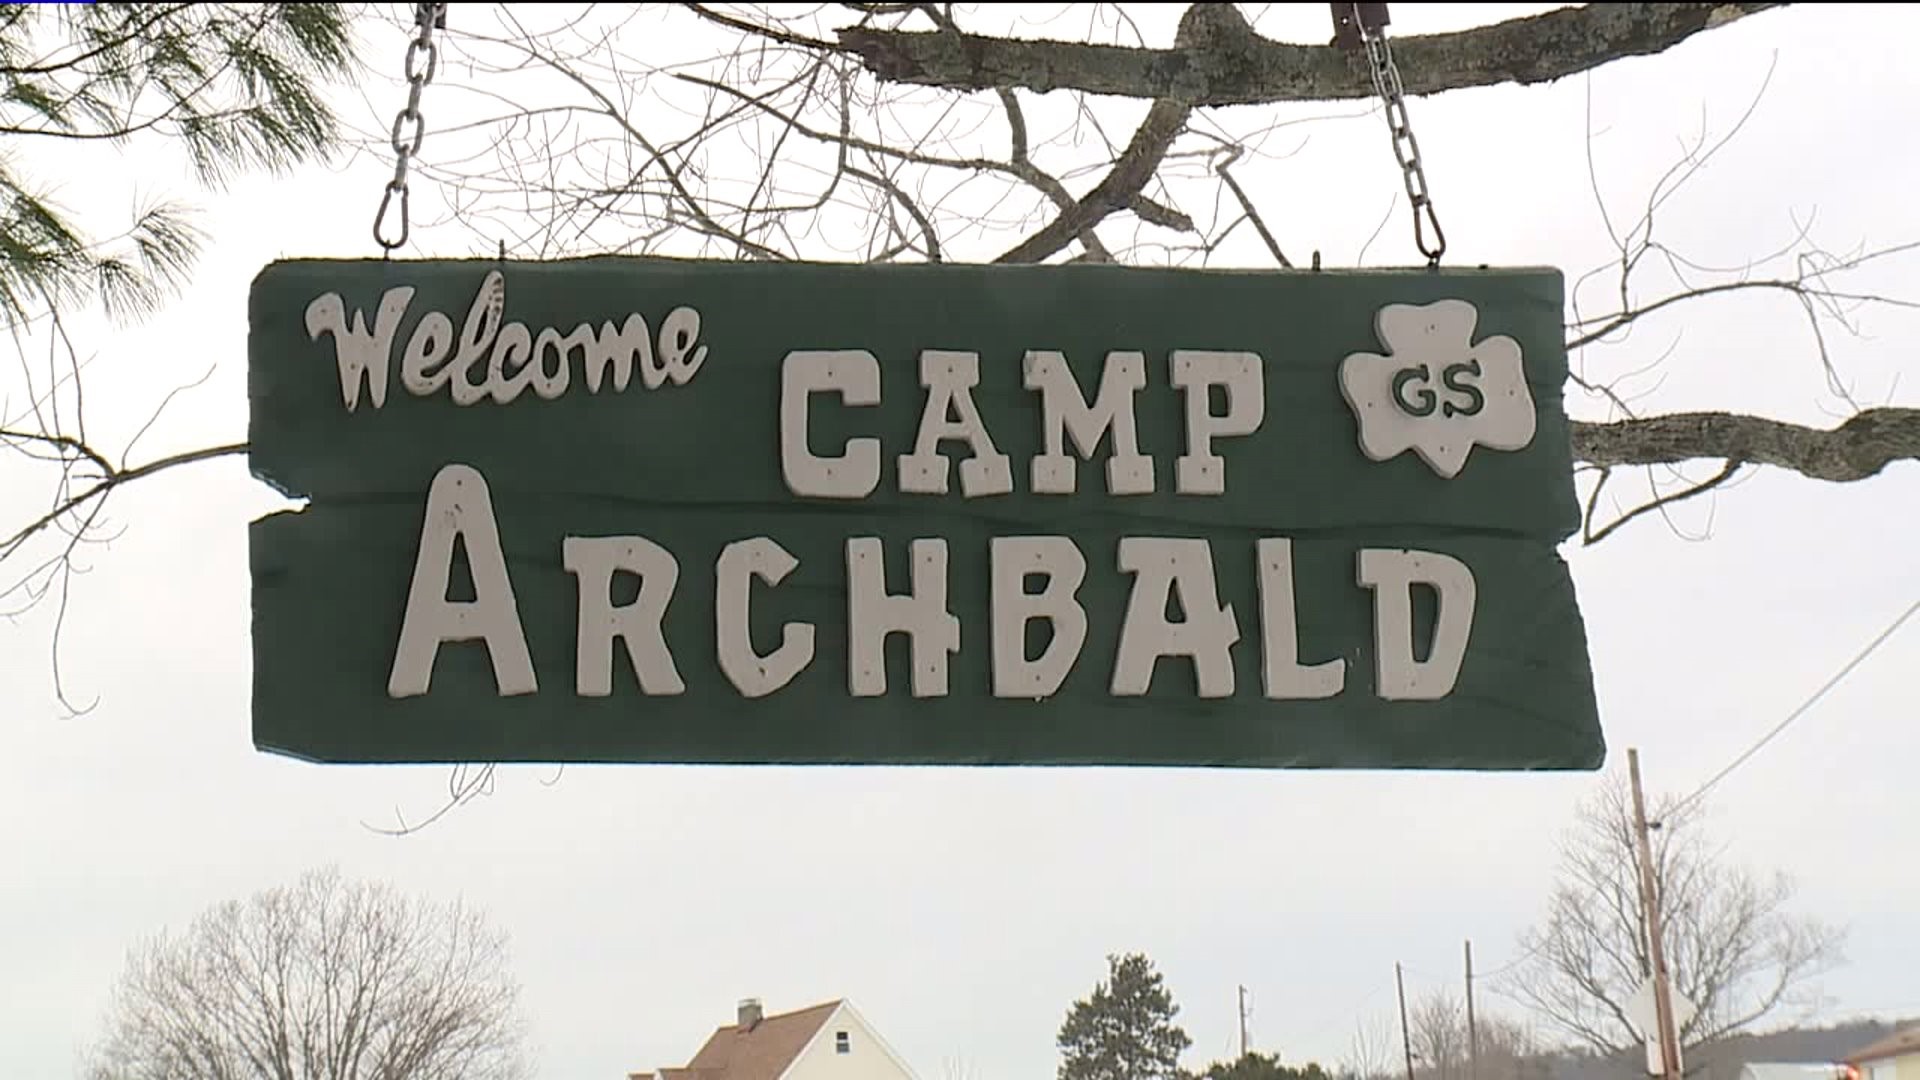 Outrage Sparks over Changes Being Made to Camp Archbald